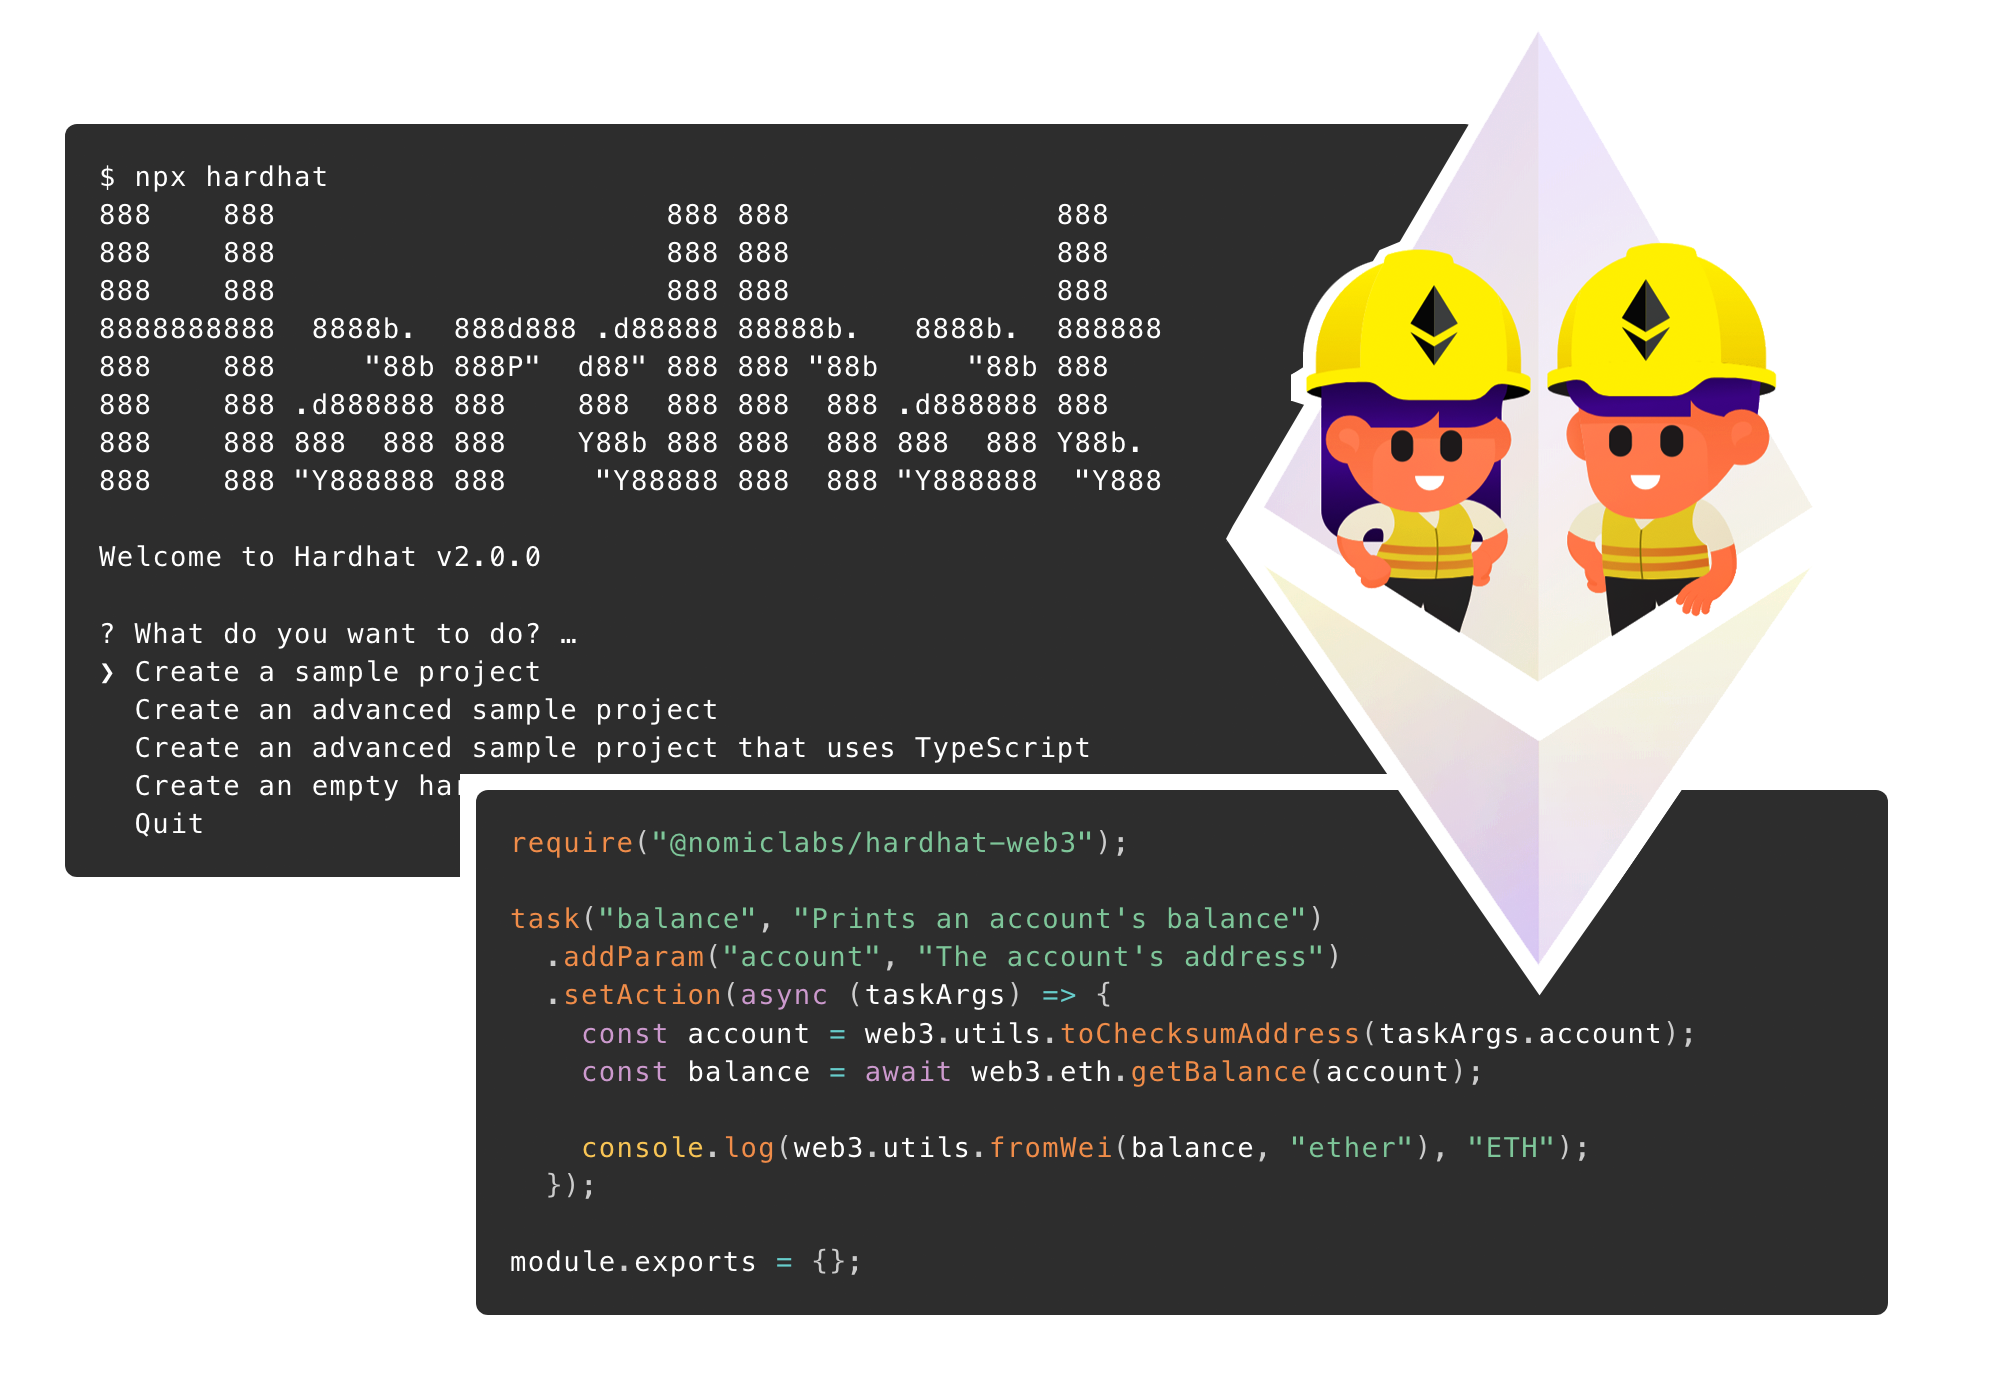 Image of Hardhat CLI screens with an inset of cartoon characters wearing the Hardhat logos helmets against an Ethereum logo icon. featured Image